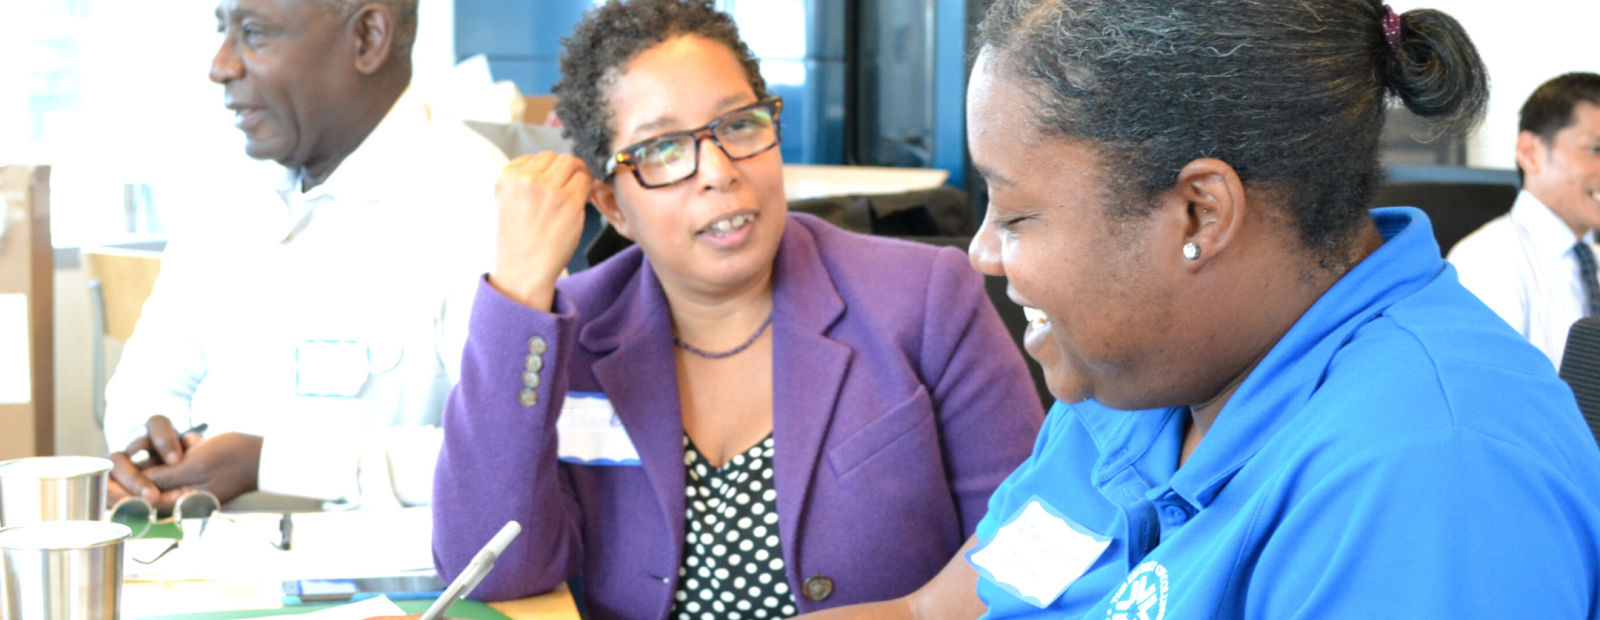 Two women talking at a work event while a man reads something in the background